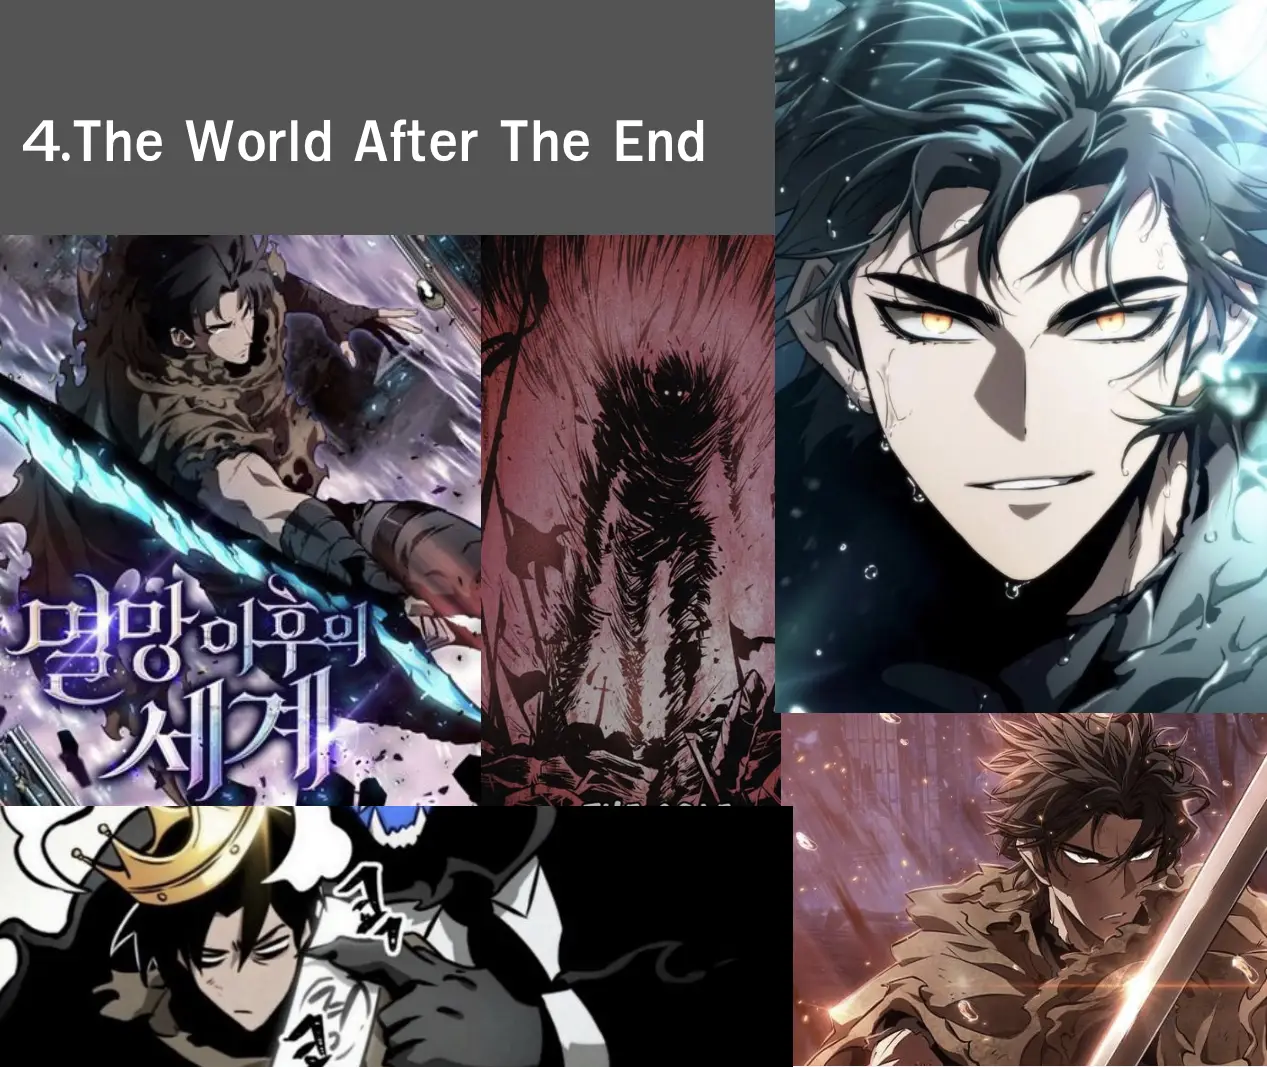 The World After The End